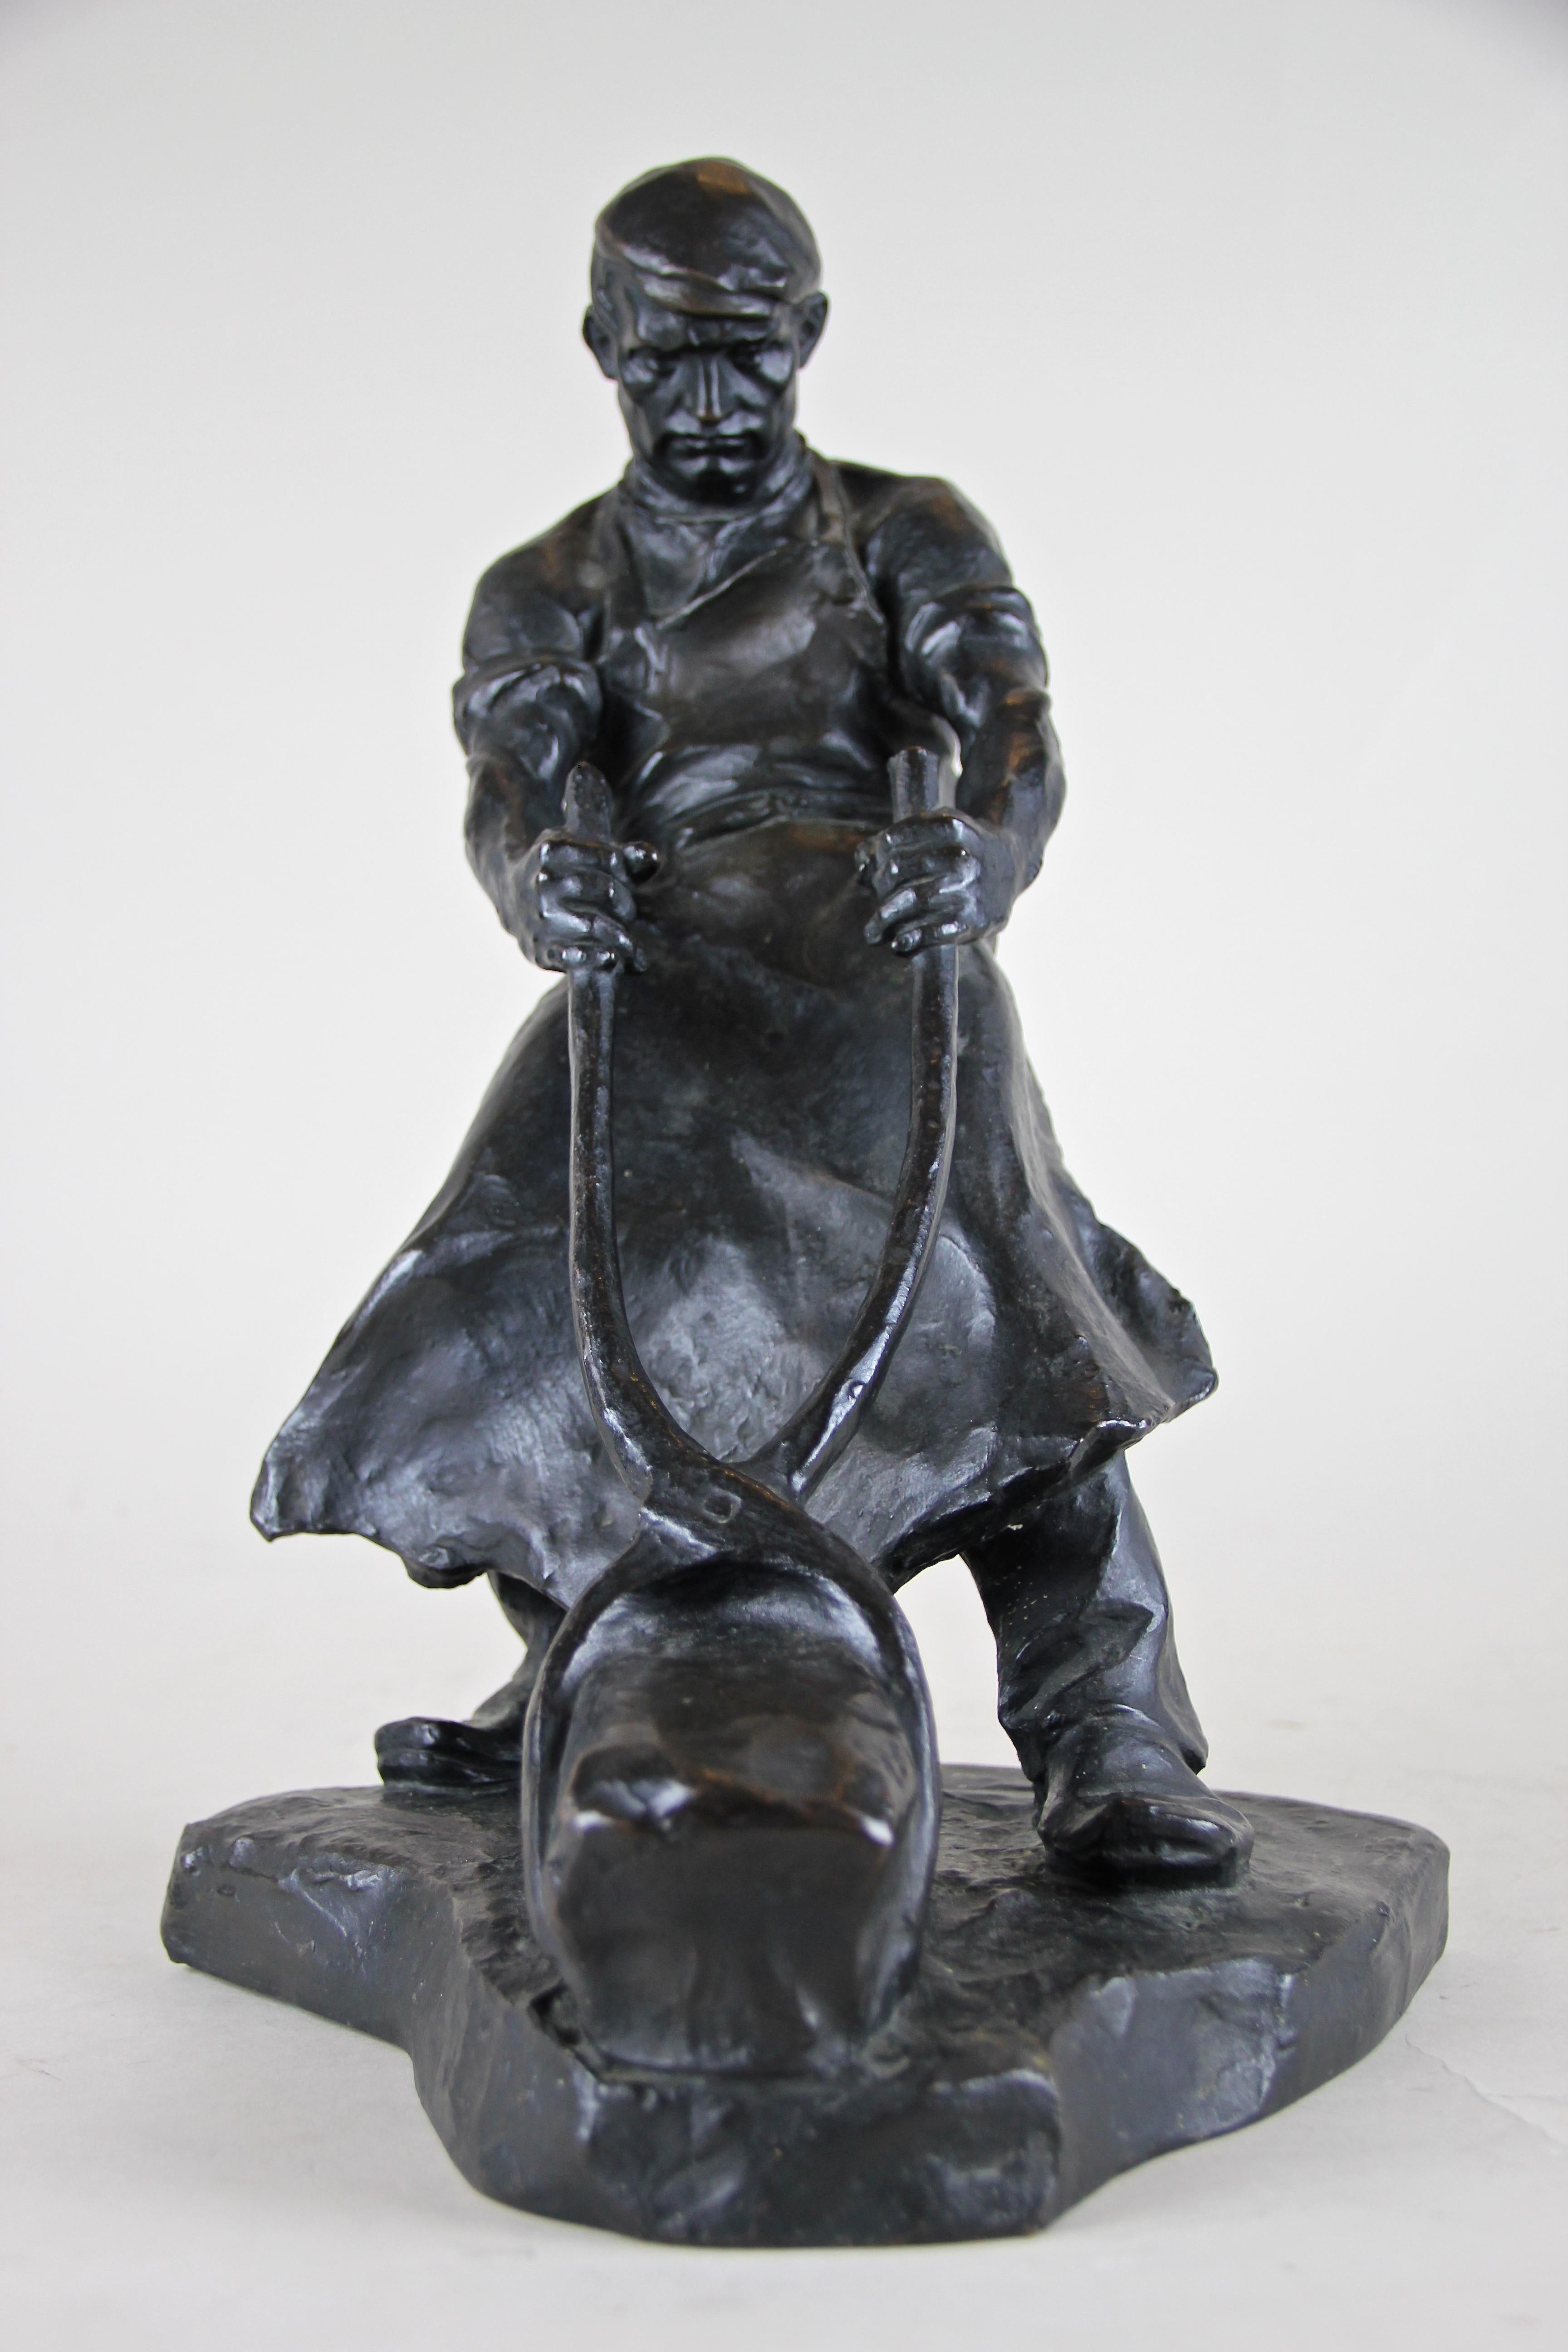 Impressive bronze sculpture by famous Austrian sculptor Hans Müller (1873-1937). This signed bronze sculpture shows an ironworker trying to grind a heavy piece of iron with a big pair of pliers. Great attention was given to details, with one look at